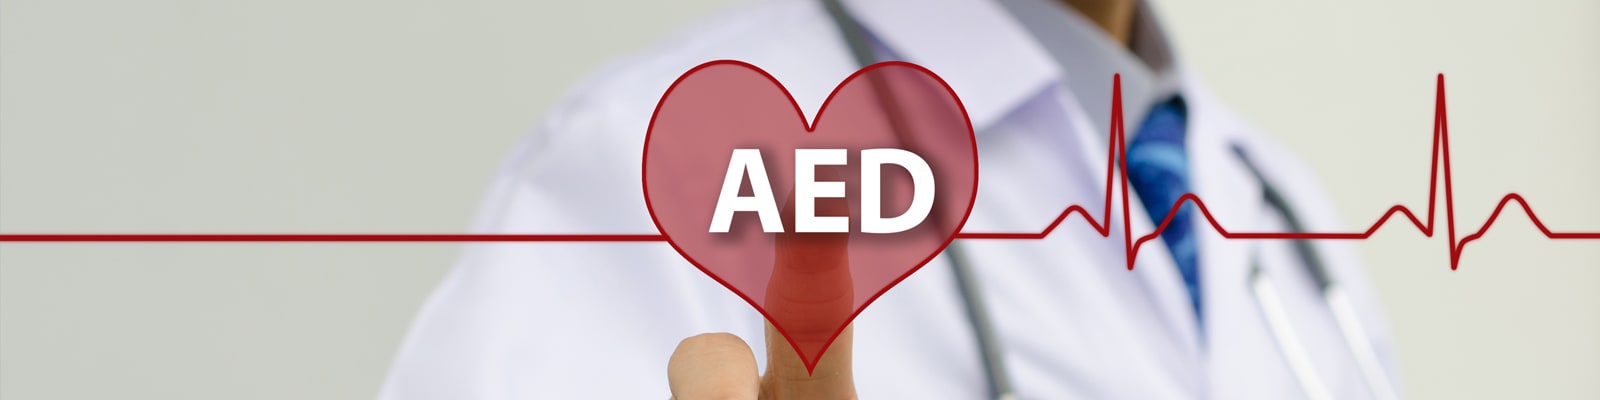 Buy AED Machines (Automated External Defibrillators) for Sale